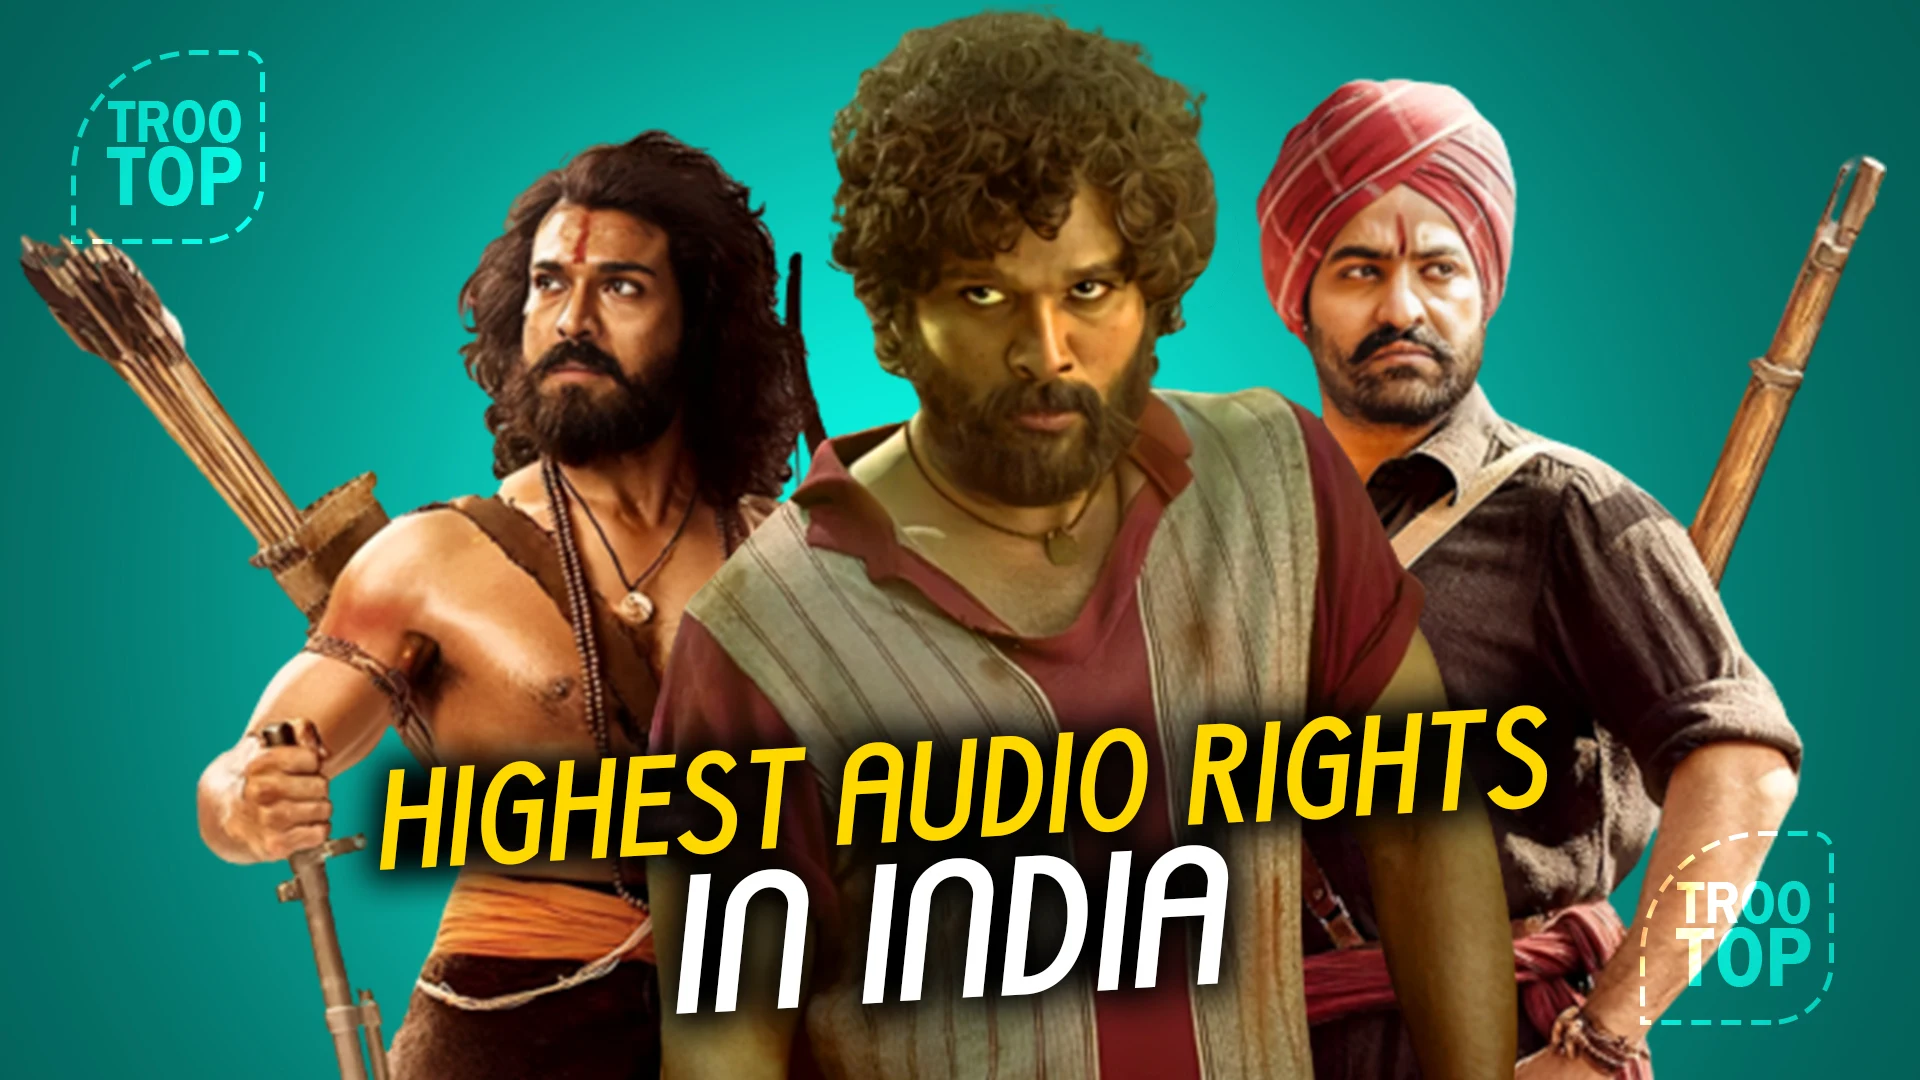 Highest Audio Rights in India